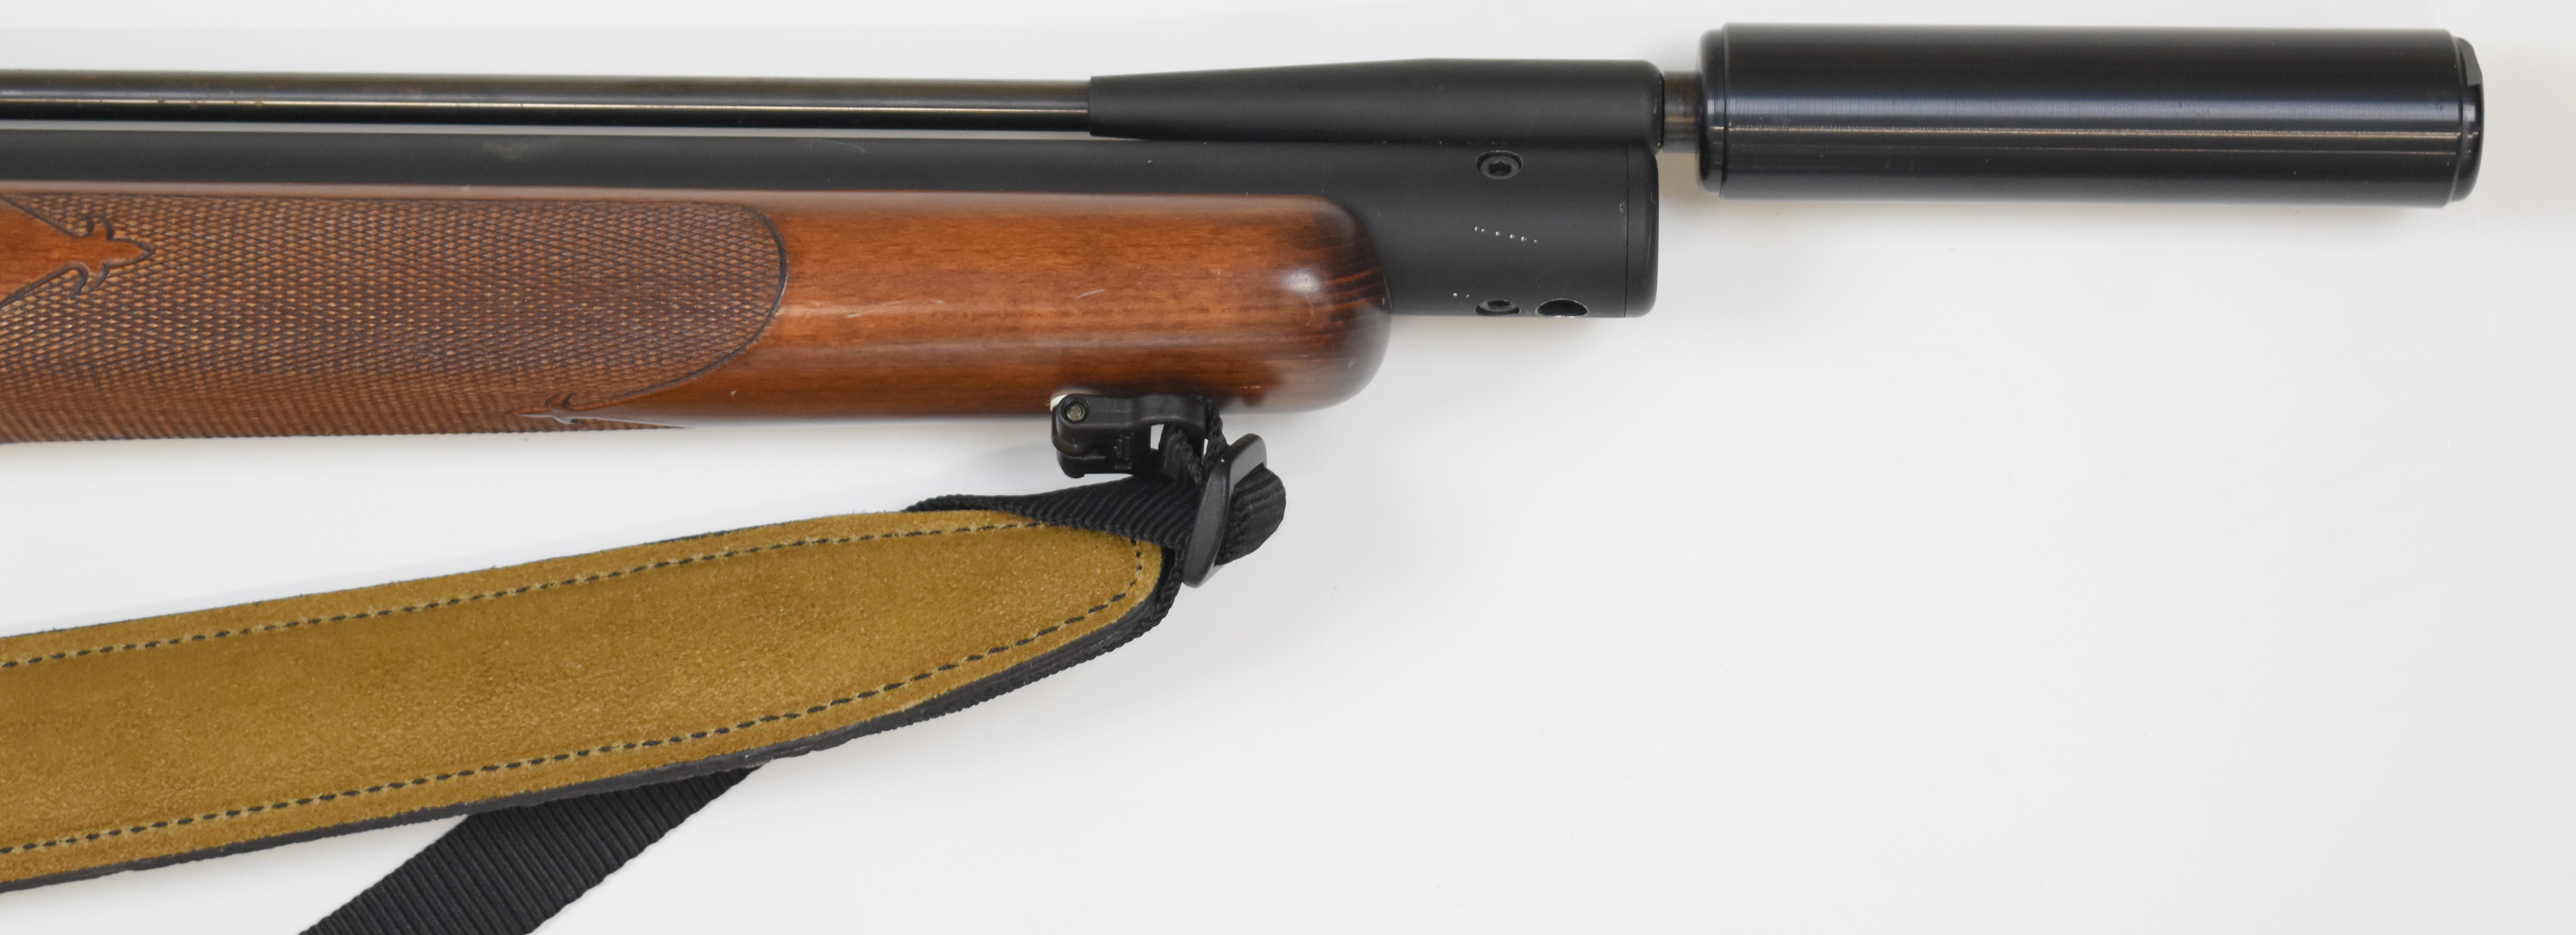 Webley Axsor .22 PCP air rifle with chequered semi-pistol grip and forend, raised cheek piece, - Image 5 of 10